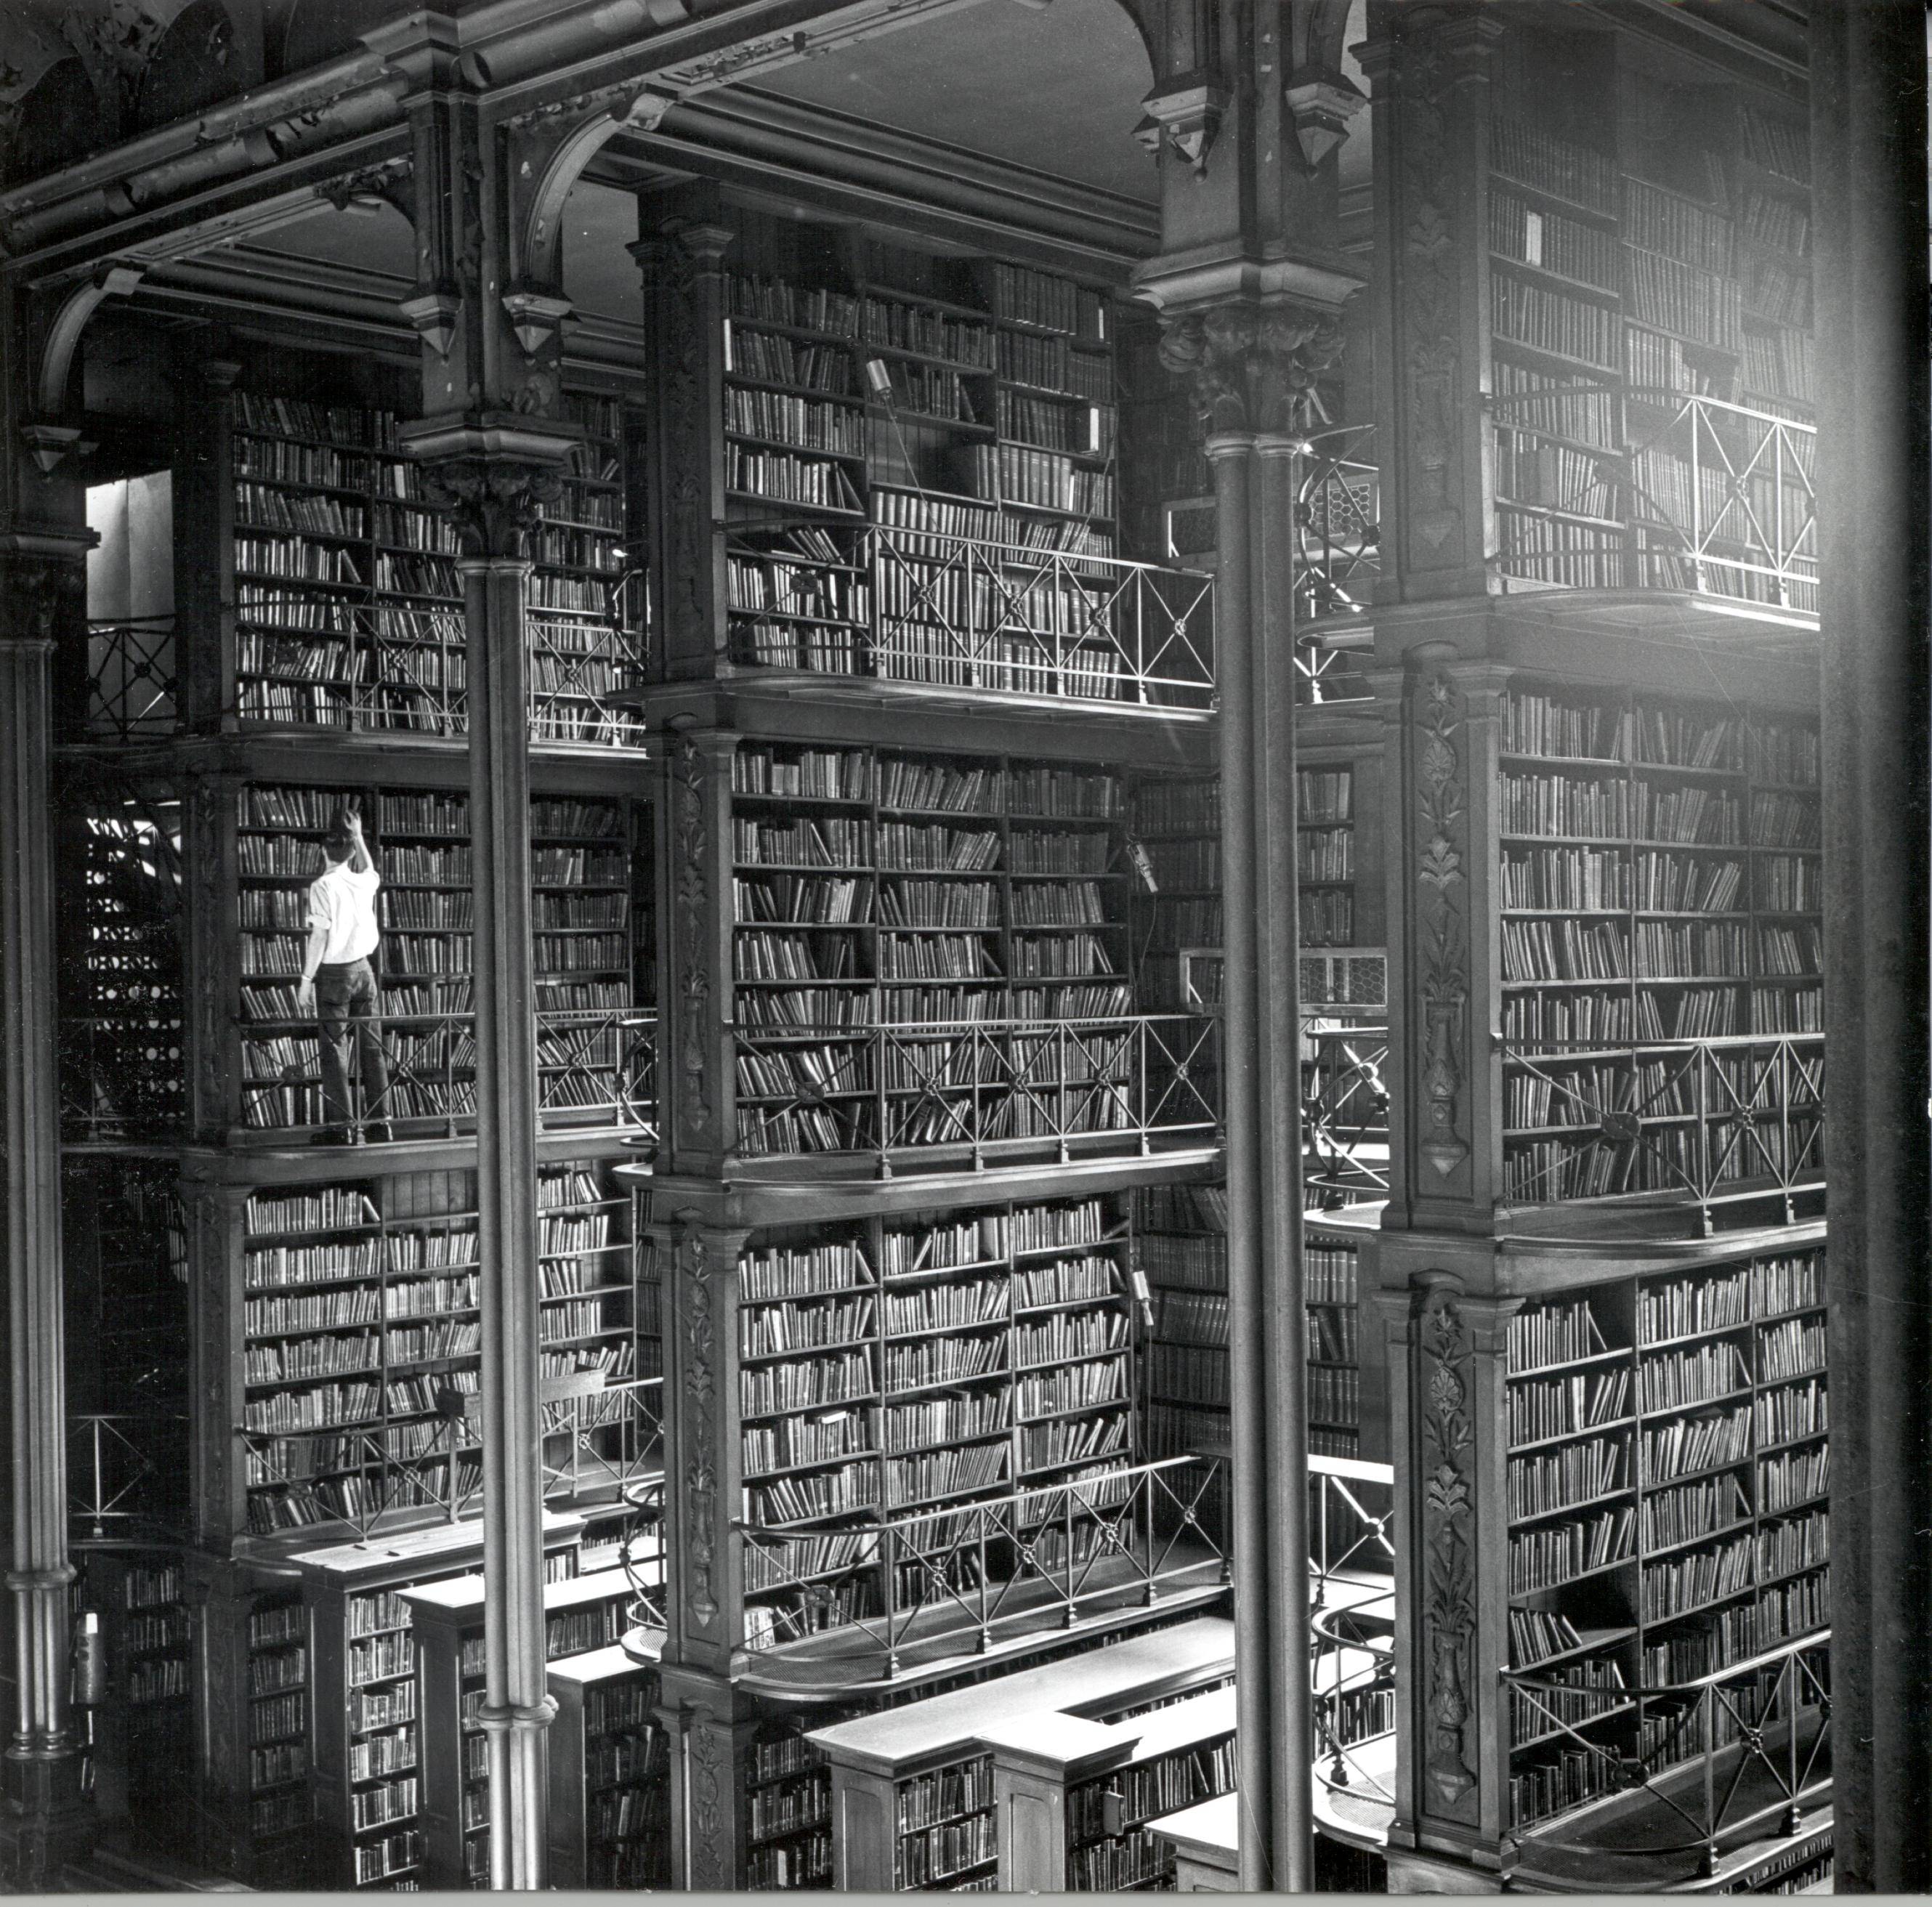 A man browsing for books in Cincinnati's cavernous old main library. The library was demolished in 1955